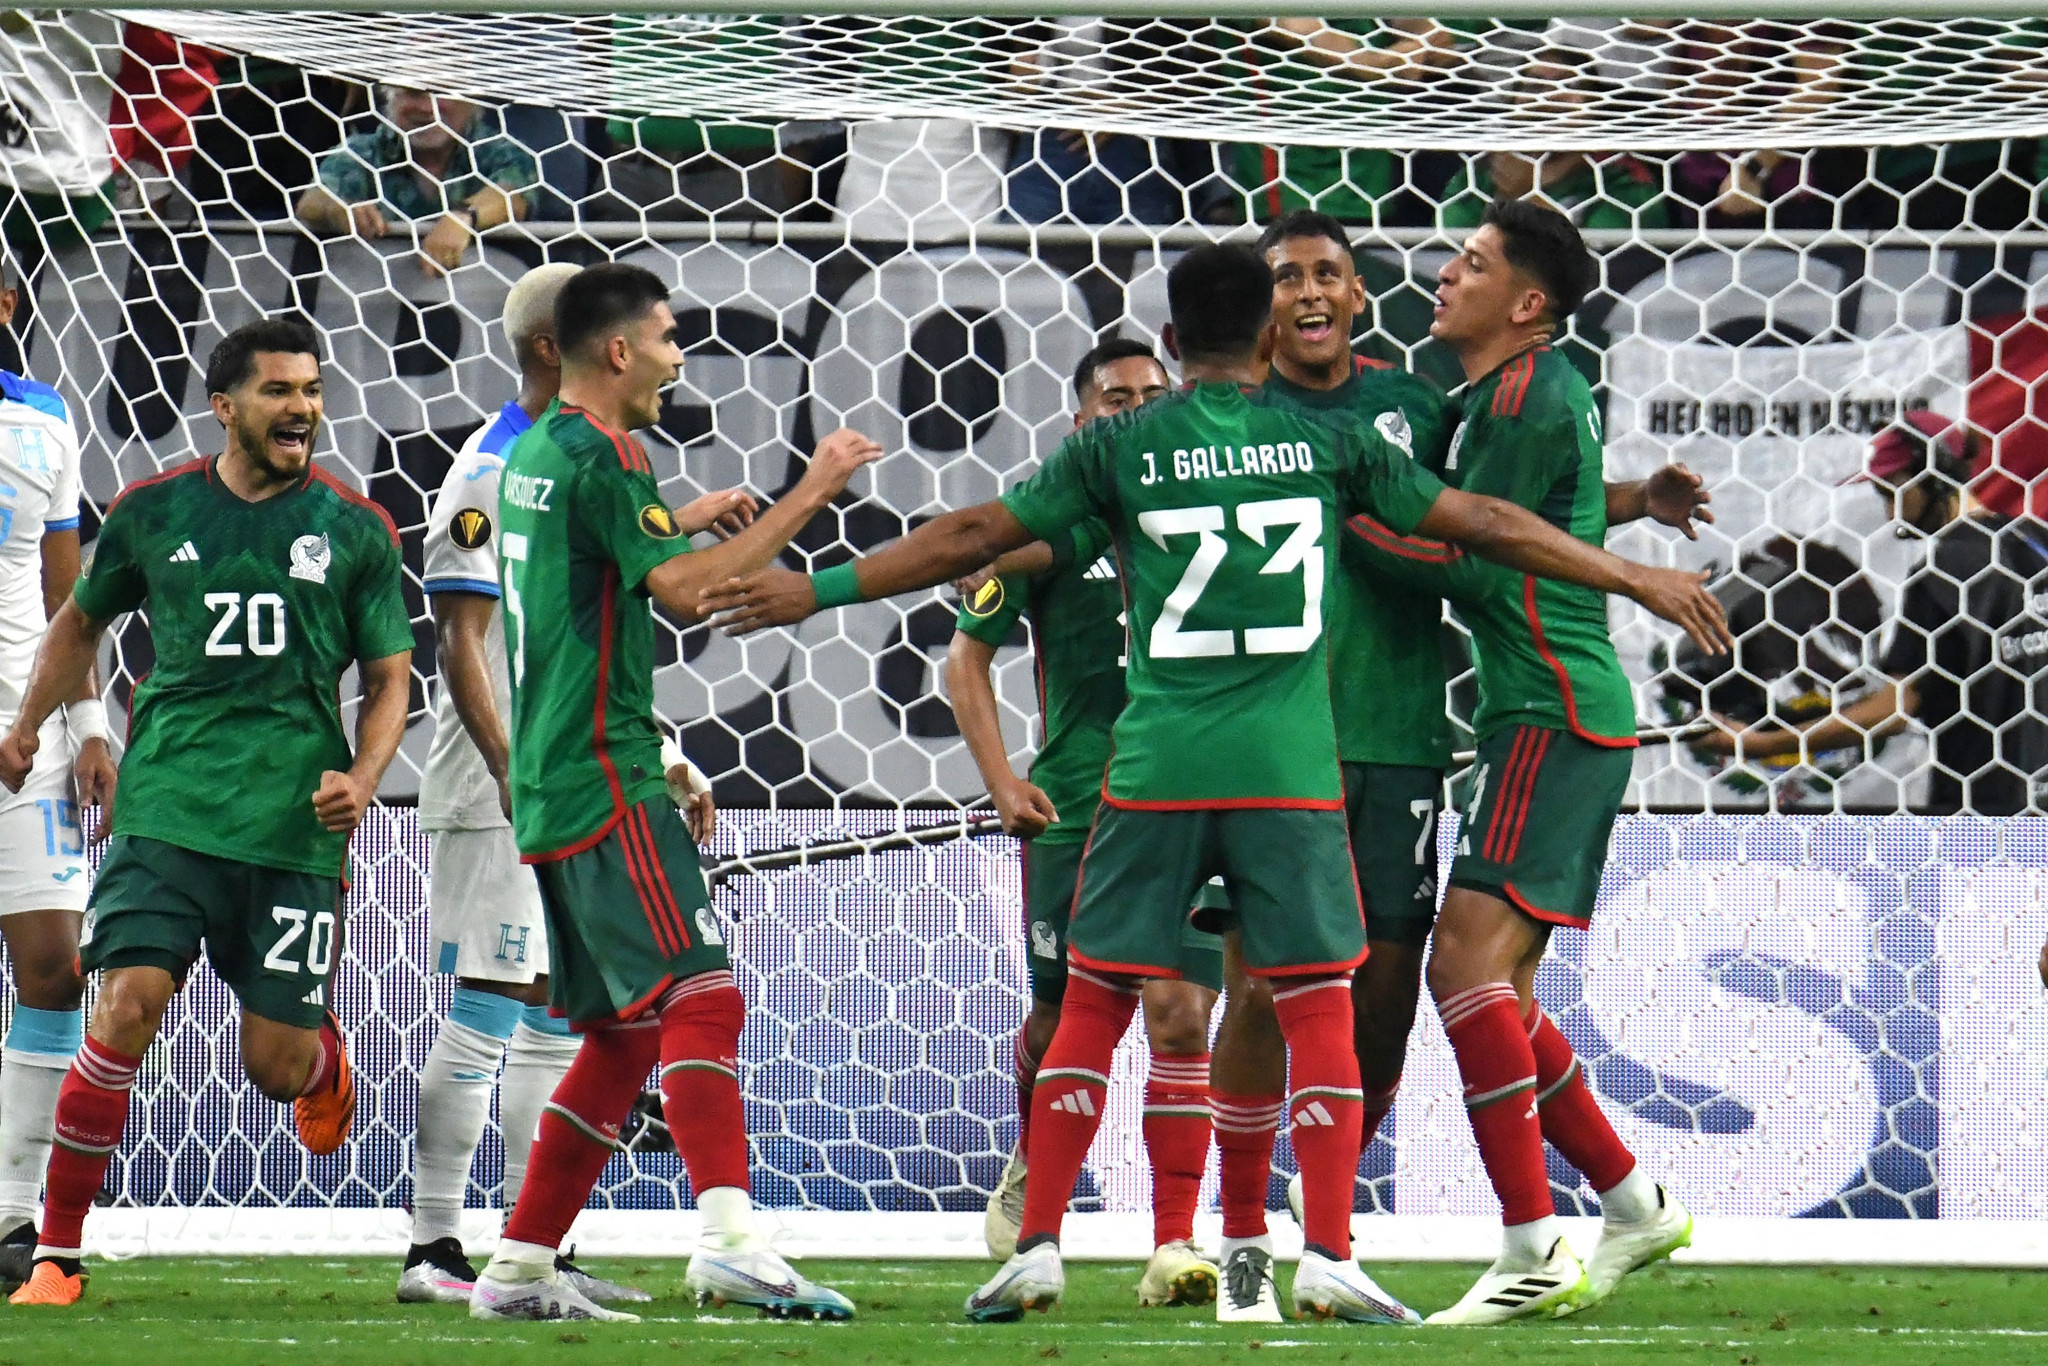 Mexico swept to a 4-0 victory against Honduras in their opening match of the CONCACAF Gold Cup in Houston ©Getty Images